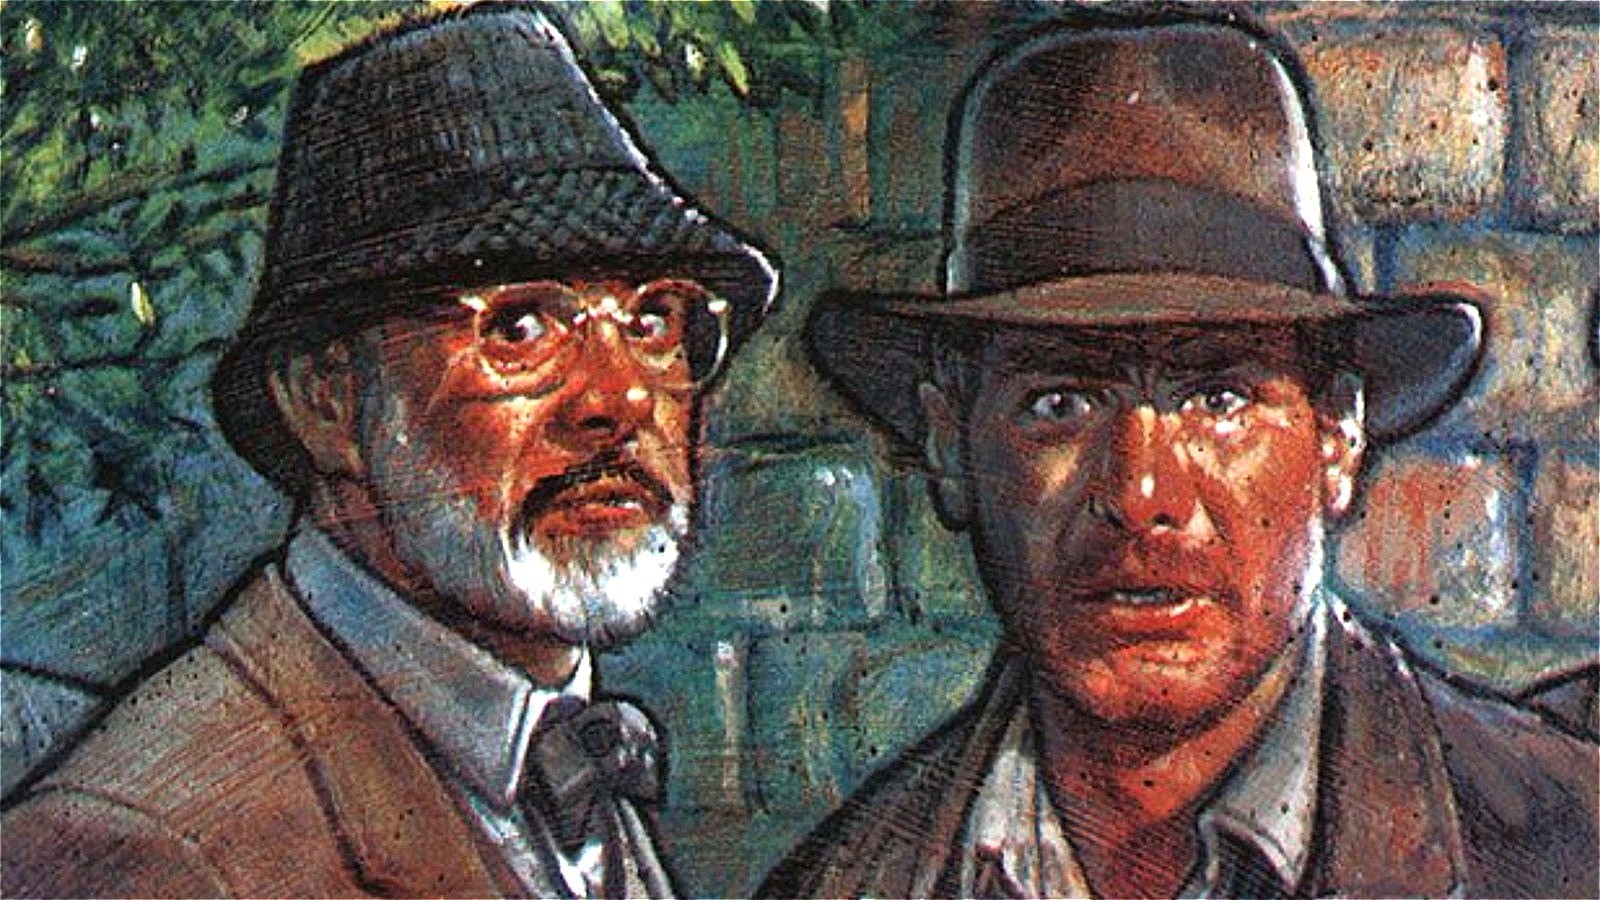 Indiana Jones Comics Gave Us The Sean Connery Later Movies Are Missing 